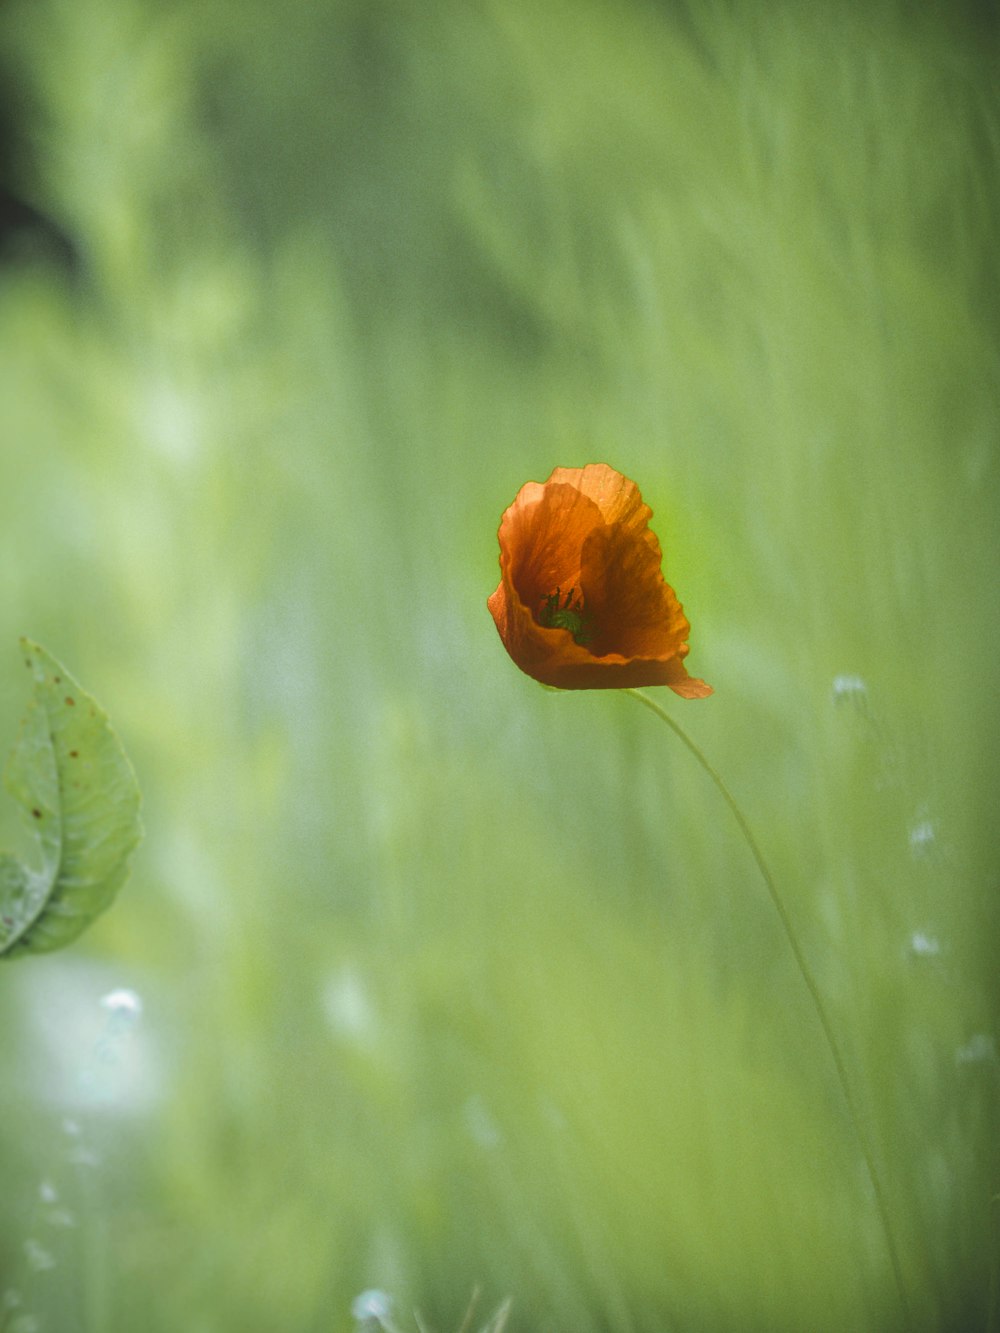 orange flower surrounded by grass during daytime